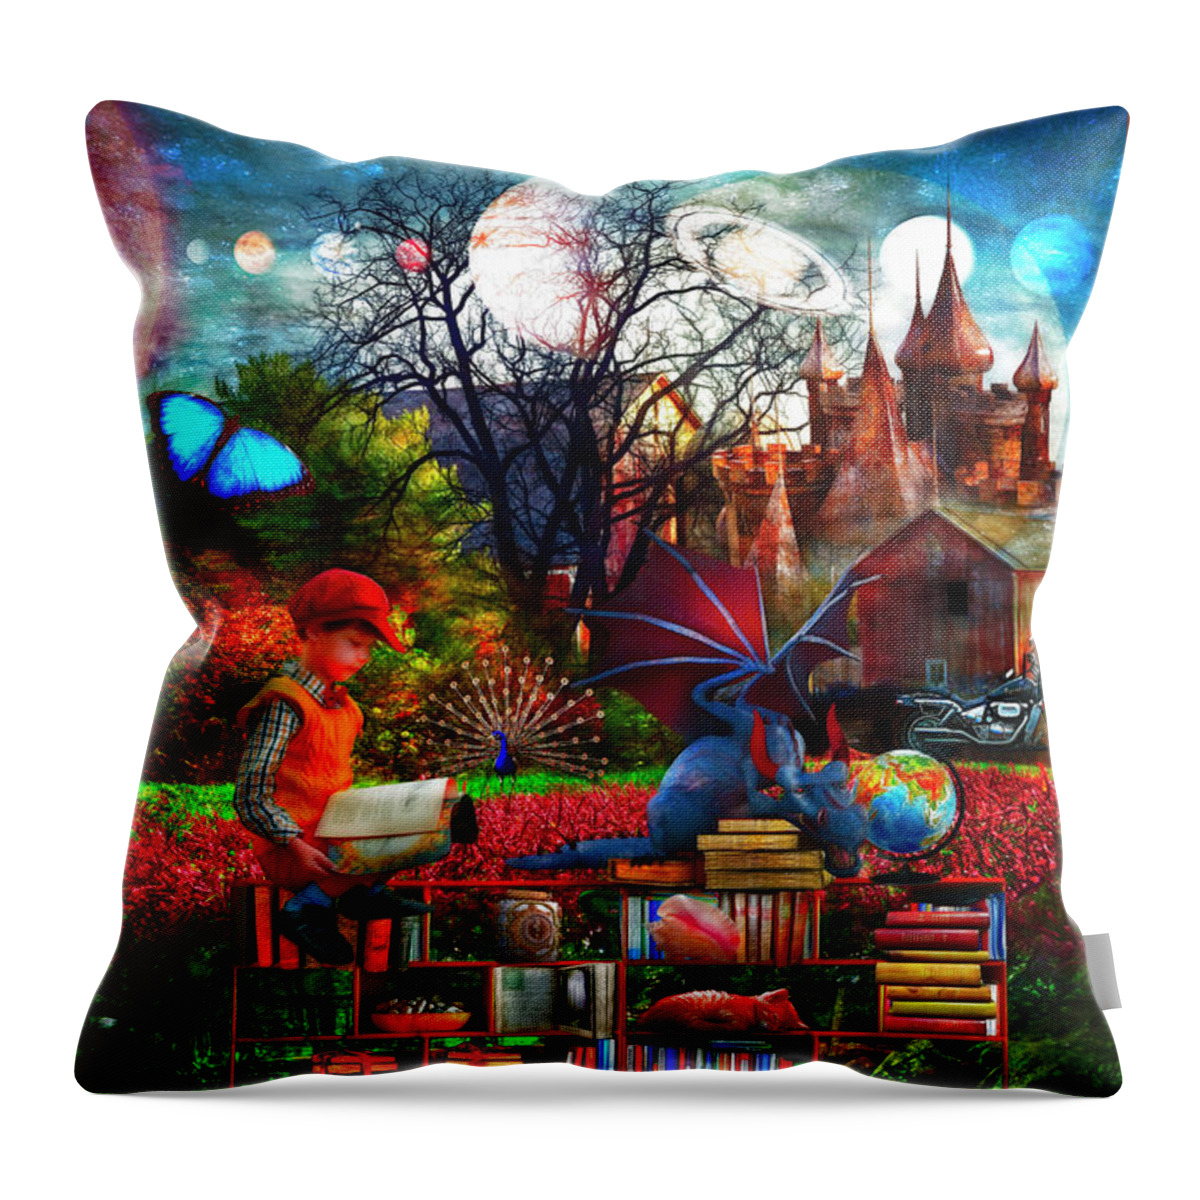 Barn Throw Pillow featuring the digital art Discovery Painting by Debra and Dave Vanderlaan